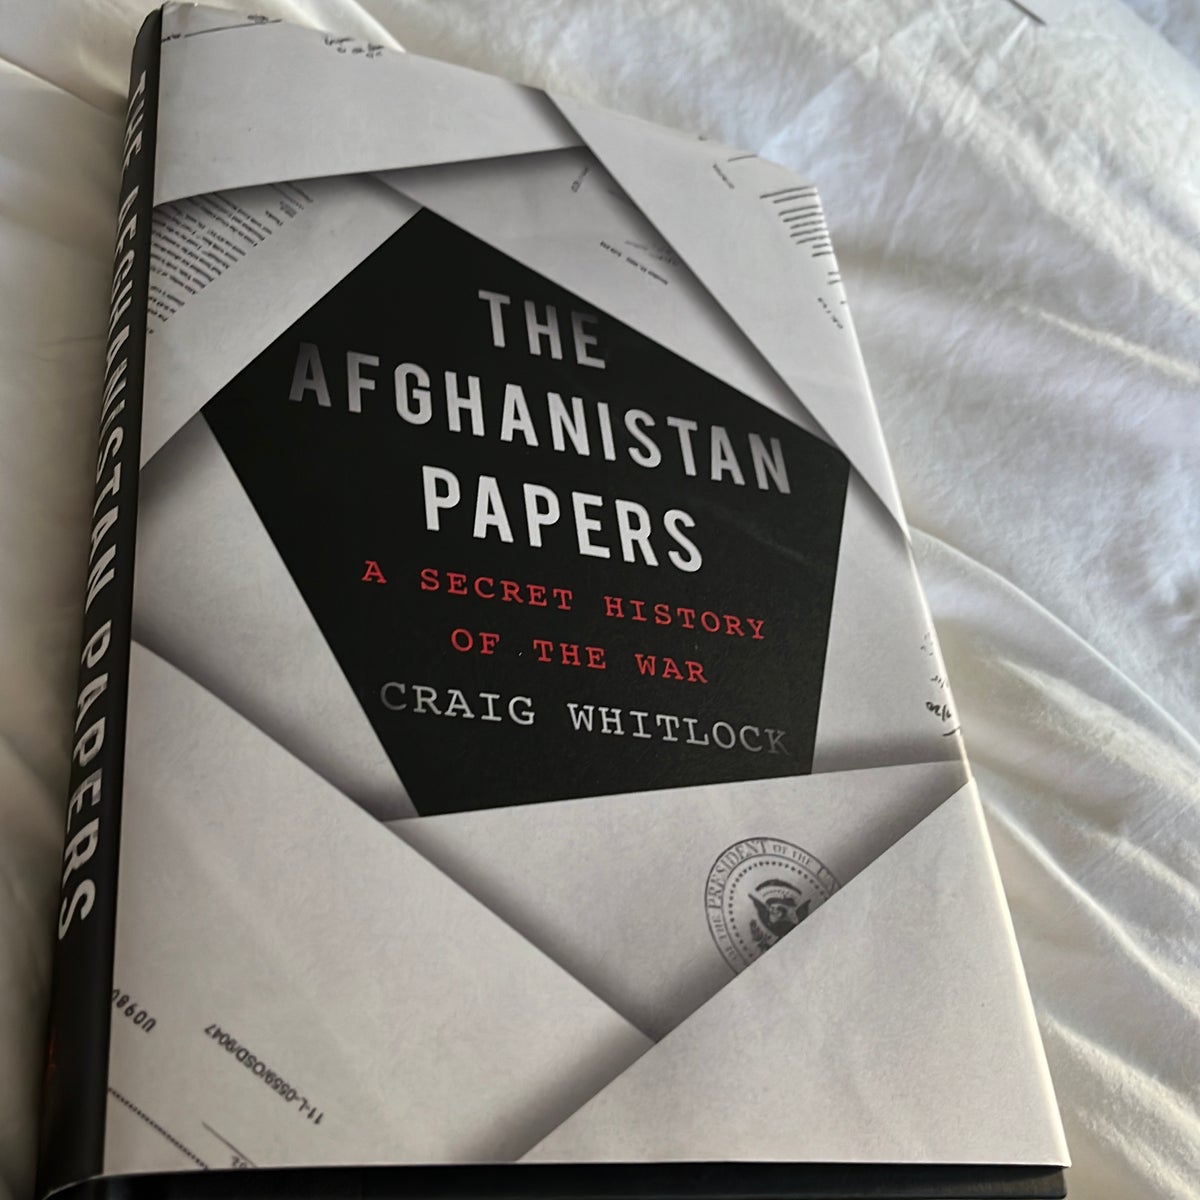 The Afghanistan Papers  Book by Craig Whitlock, The Washington